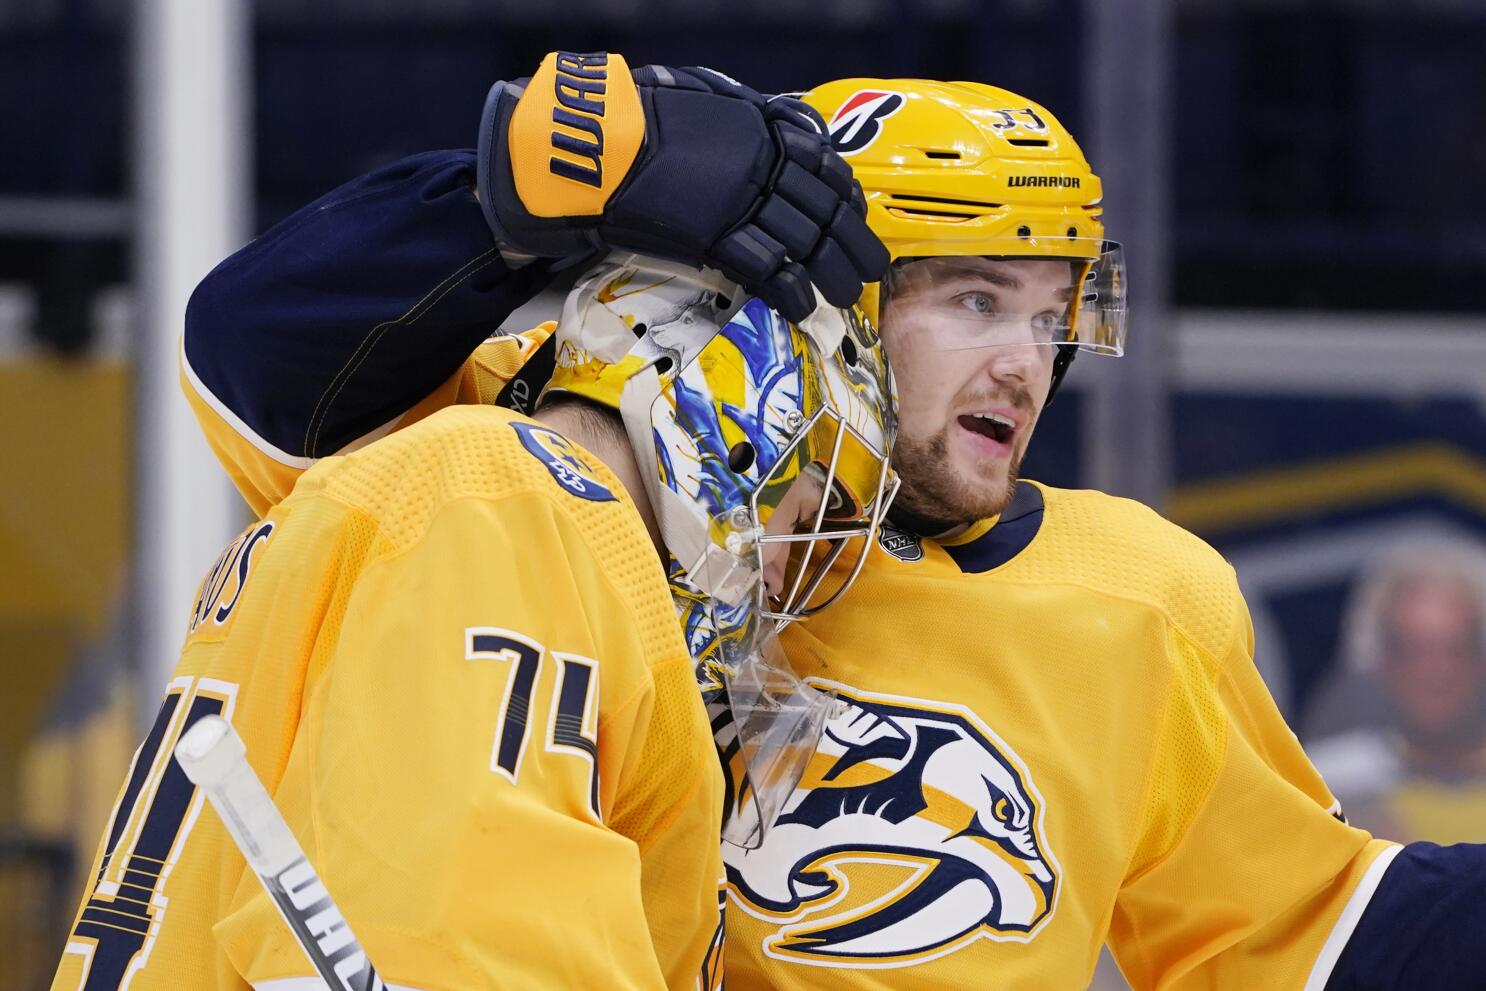 Tonight, our rivals are on the other - Nashville Predators